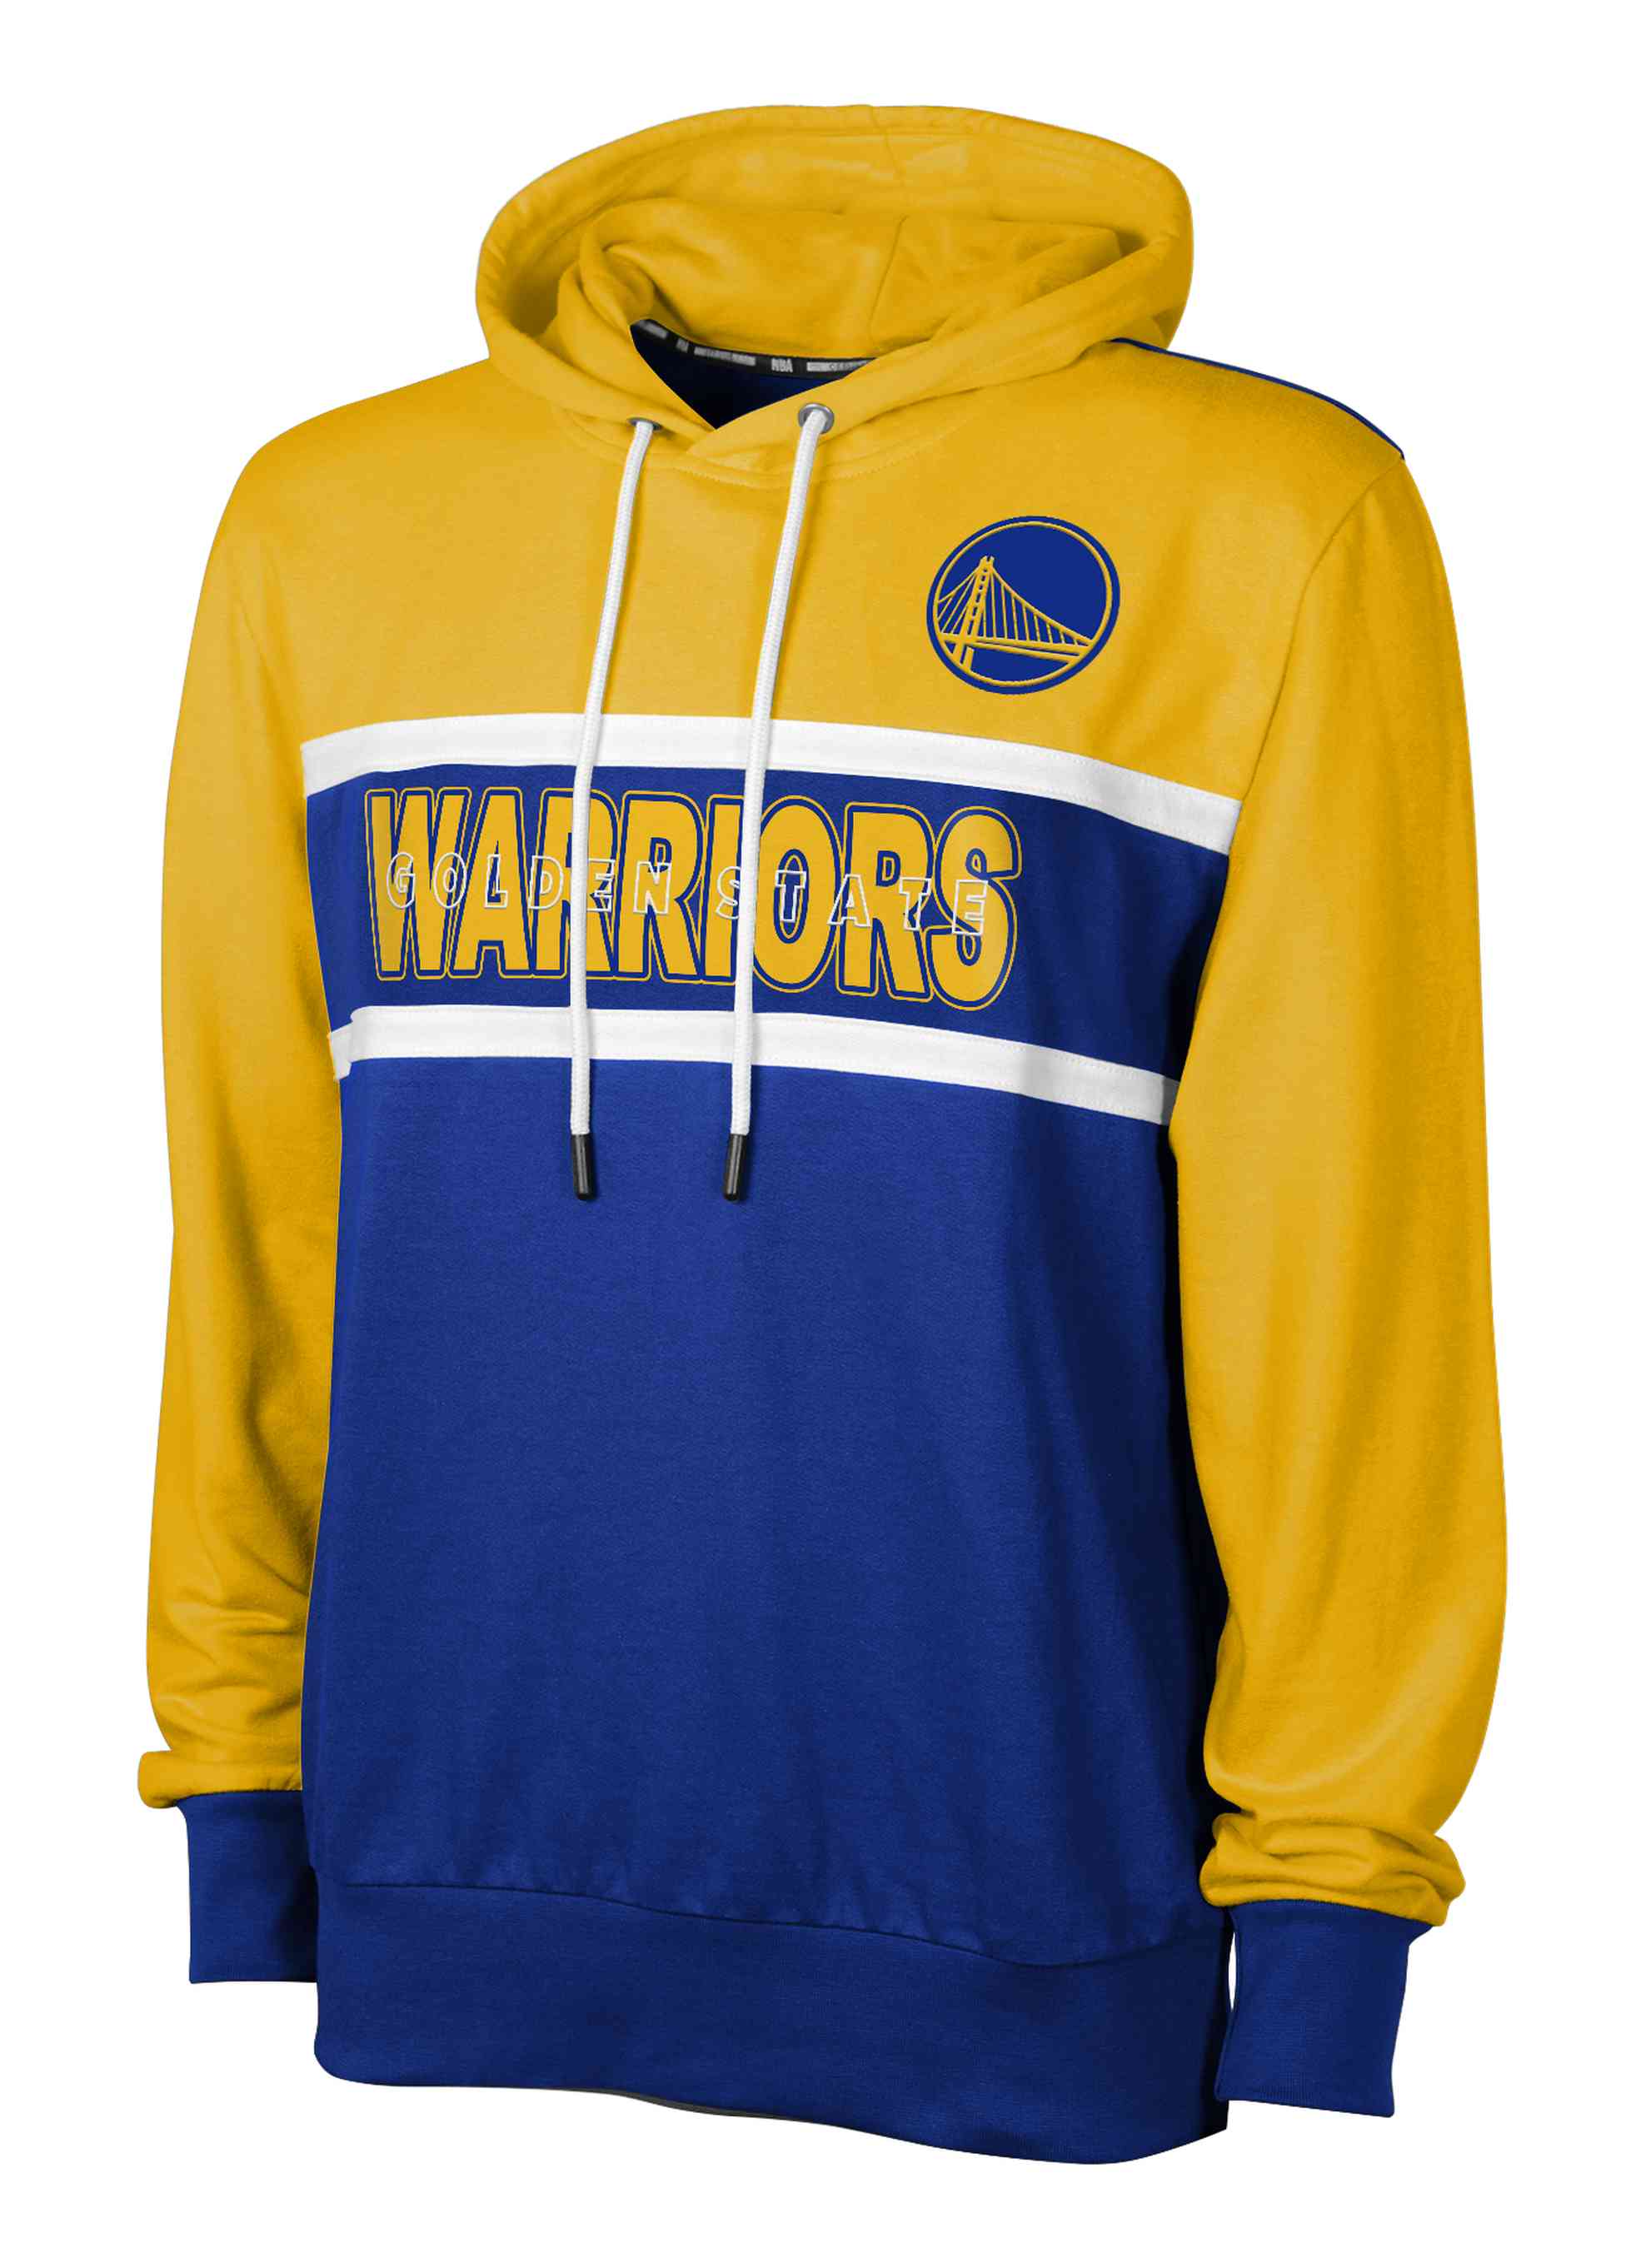 Outerstuff - NBA Golden State Warriors Pull-Over Stephen Curry Hoodie